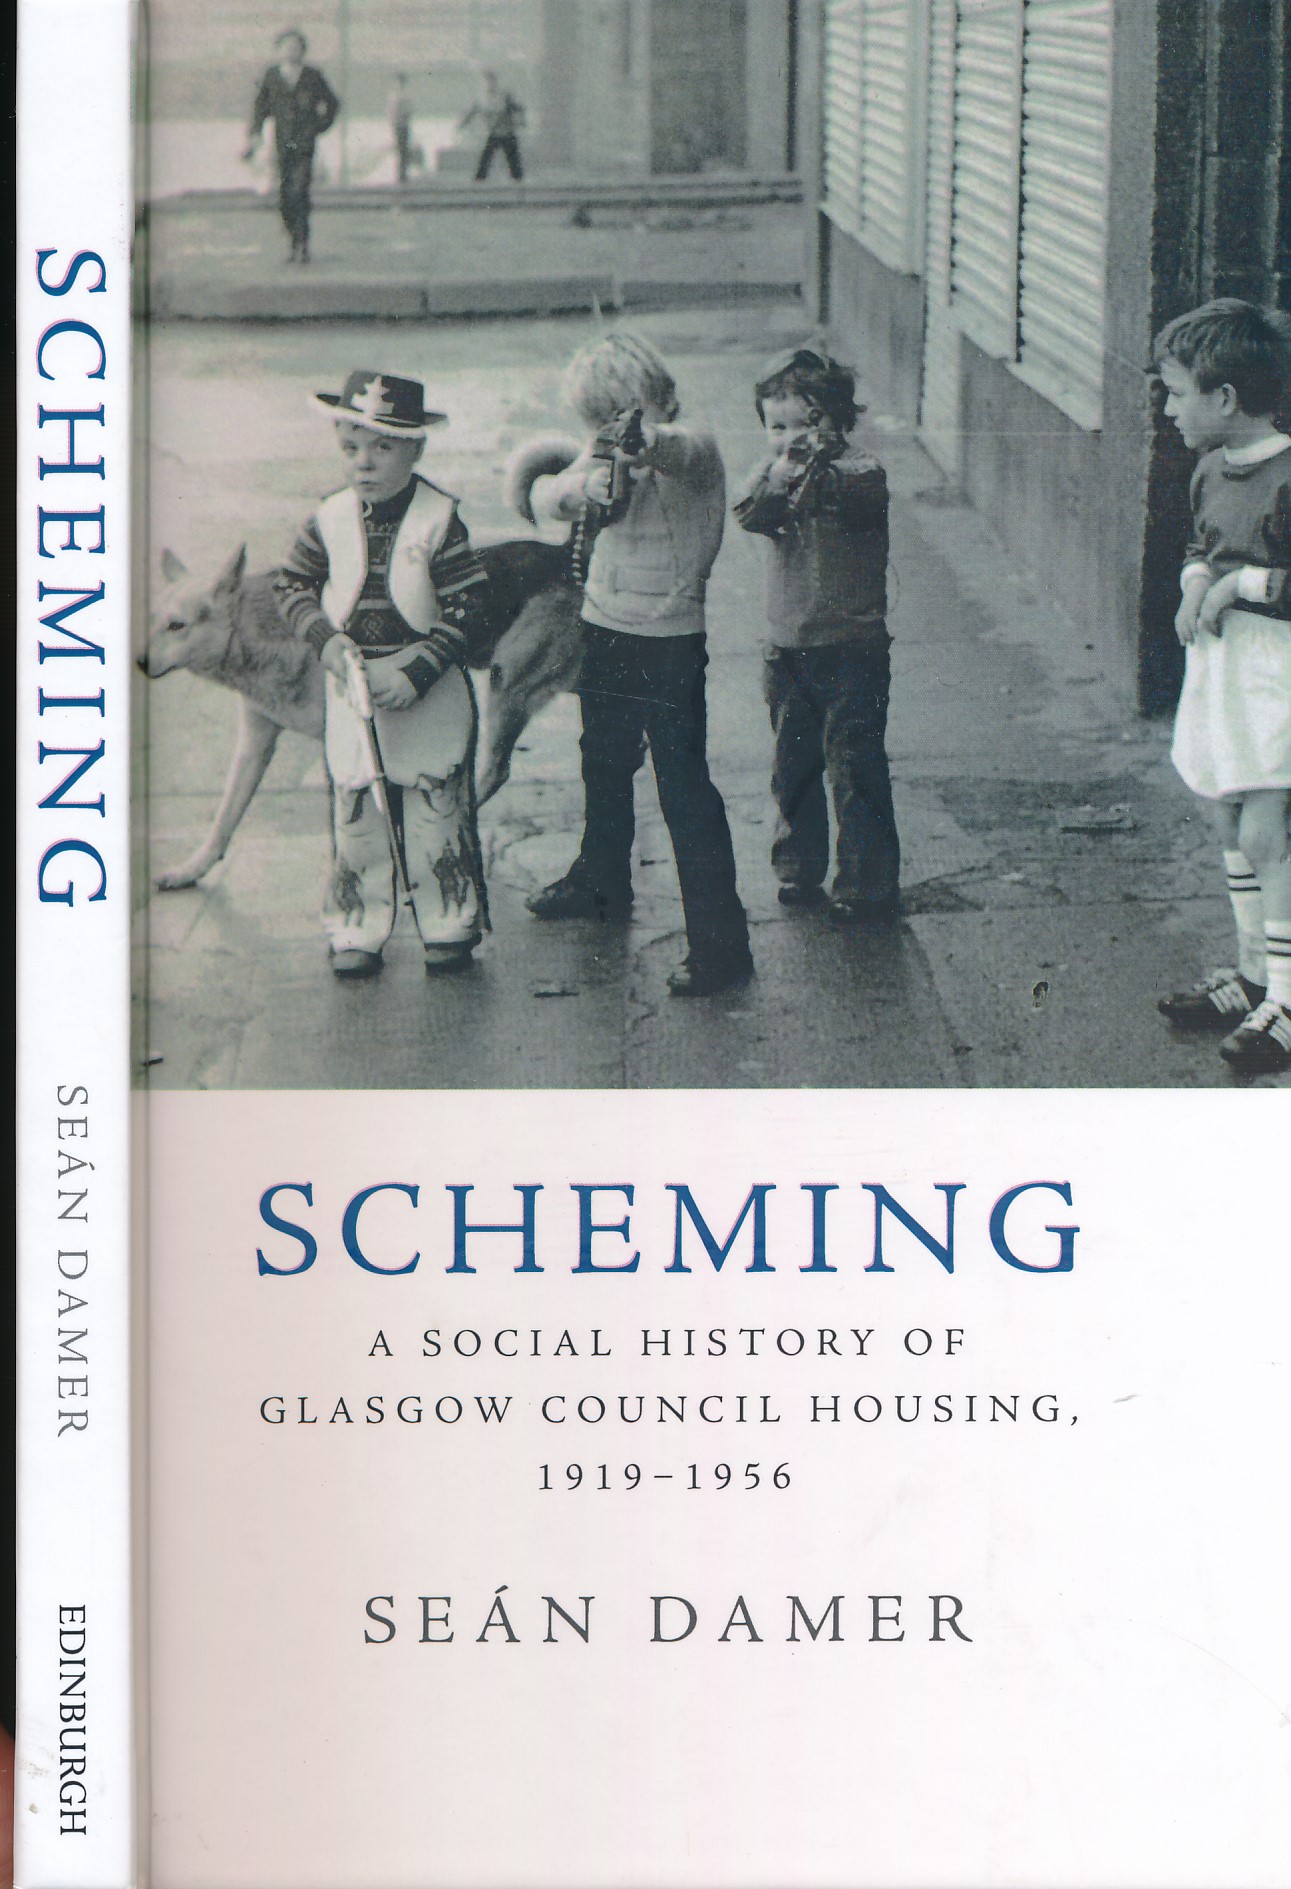 Scheming. A Social History of Glasgow Council Housing 1919 - 1956